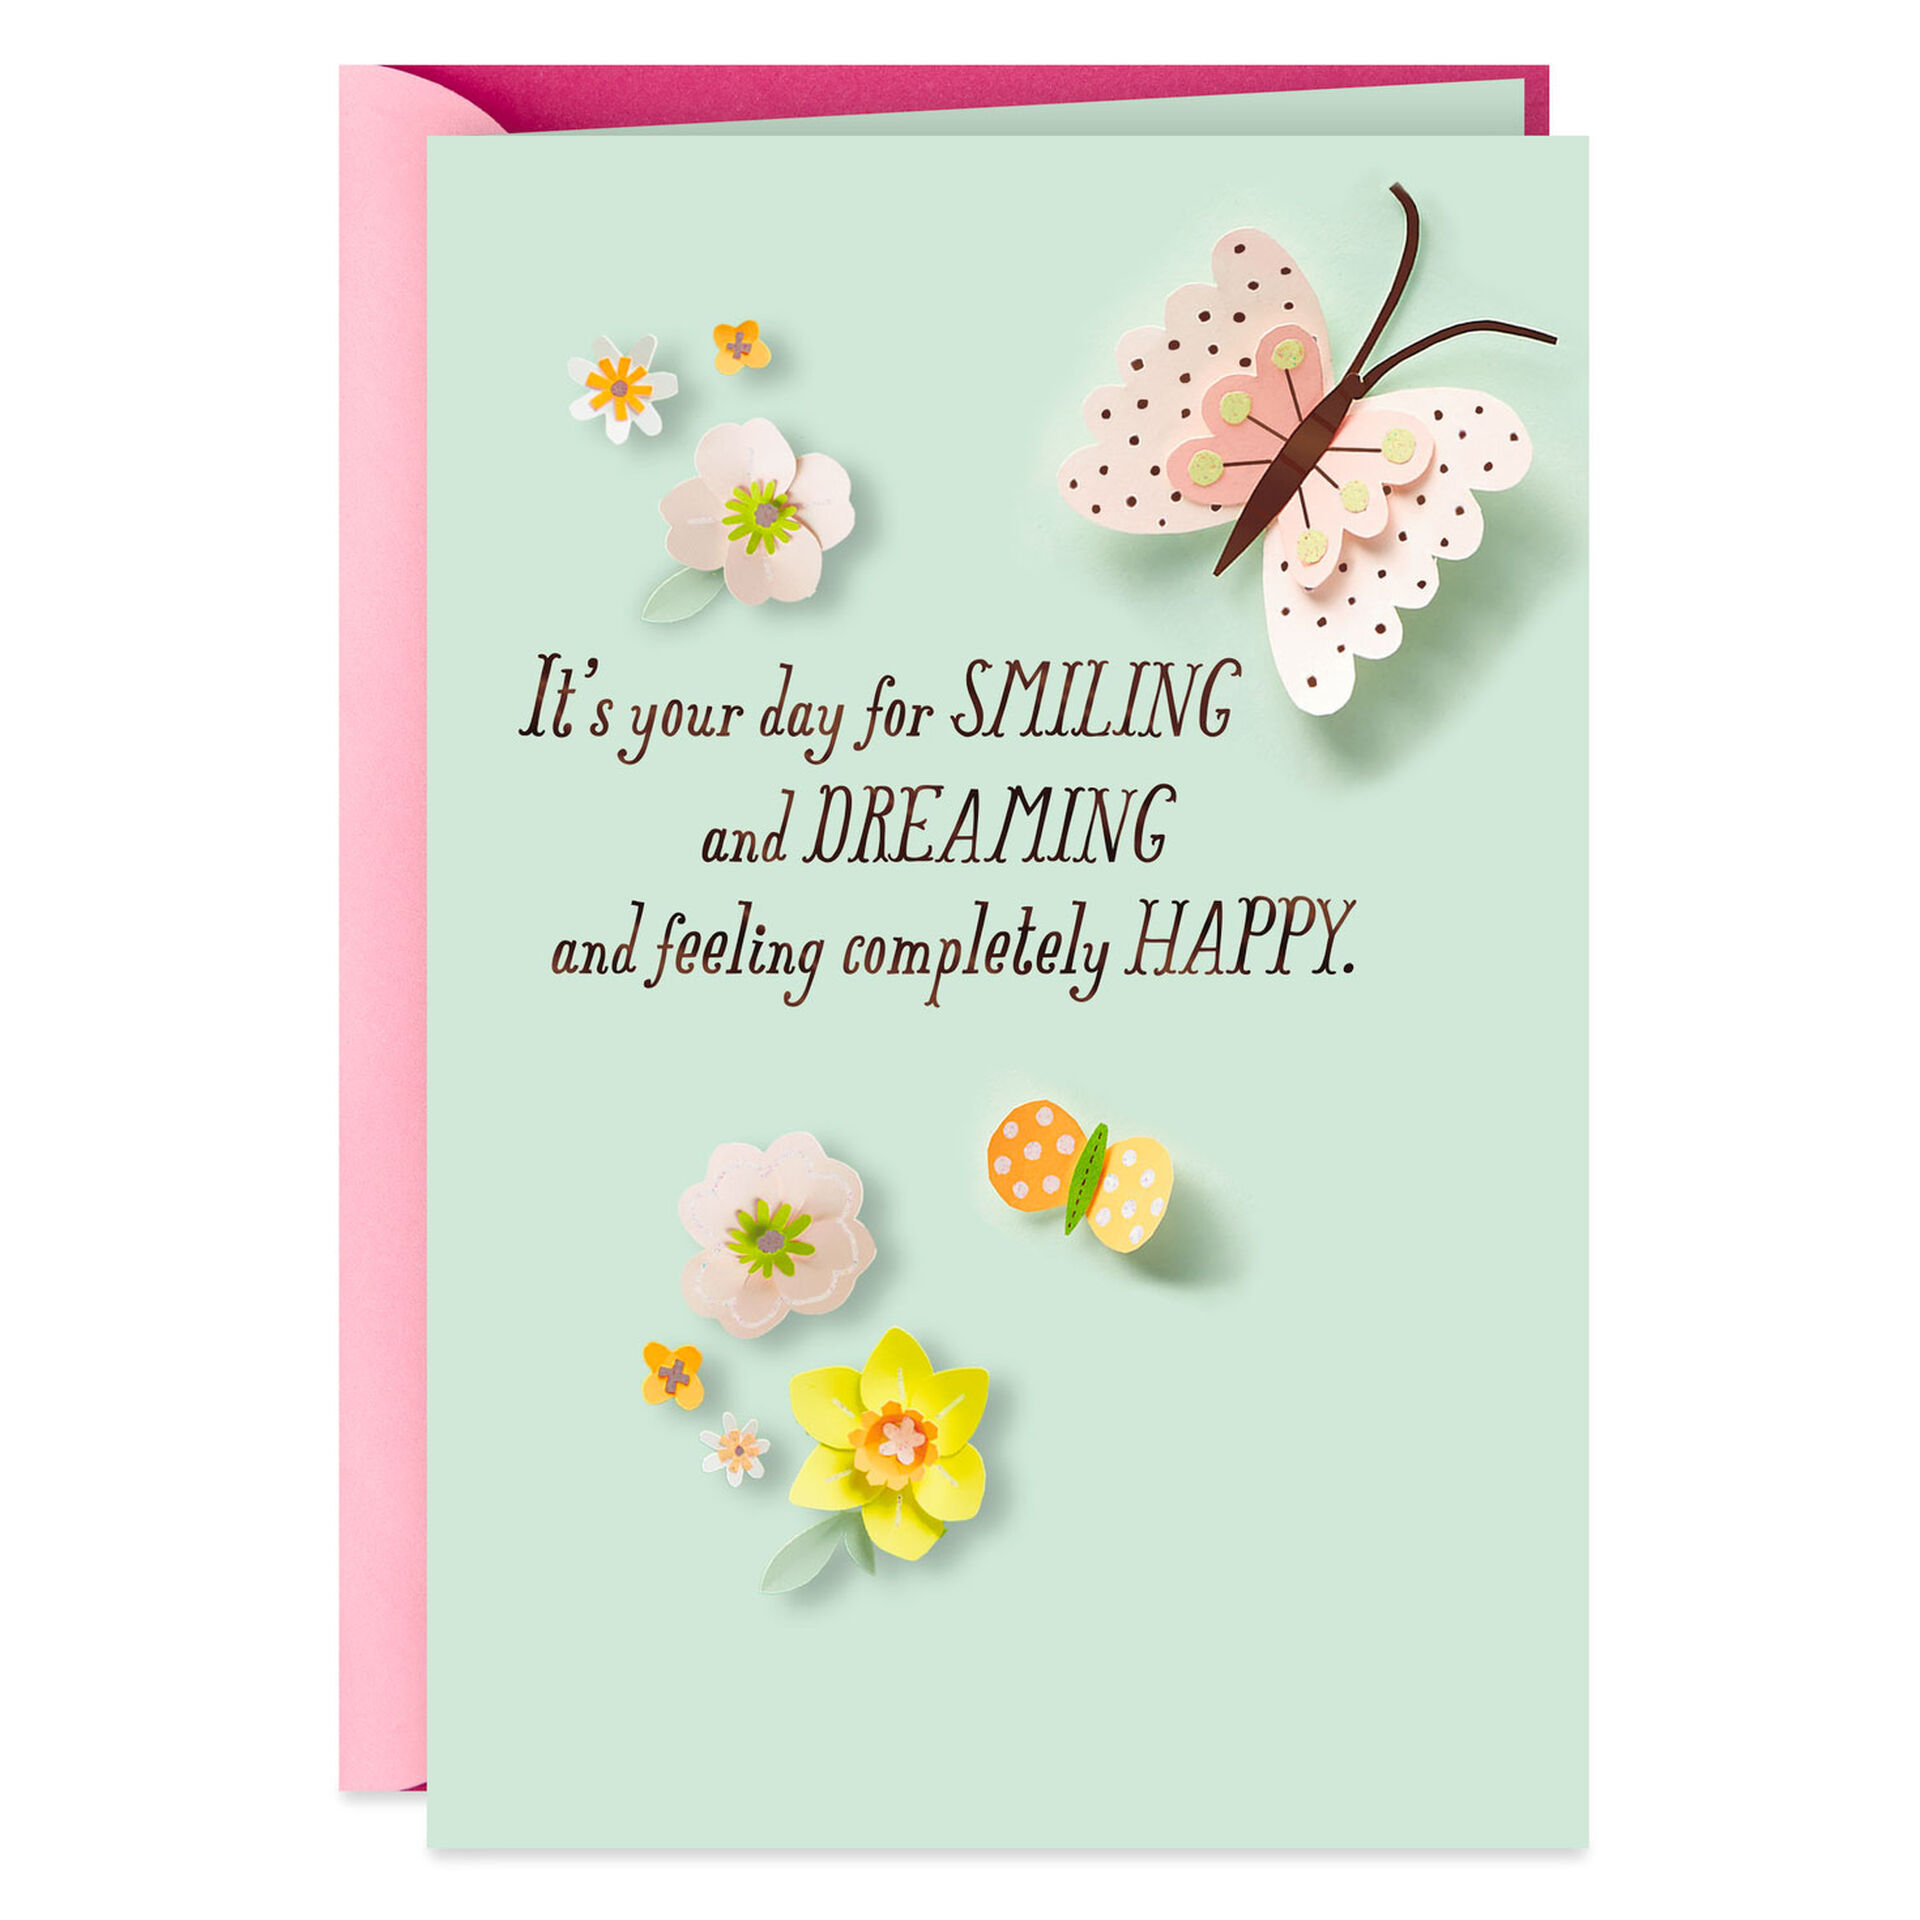 A-Day-for-Smiling-Dreaming-Birthday-Card_299HBD3446_01